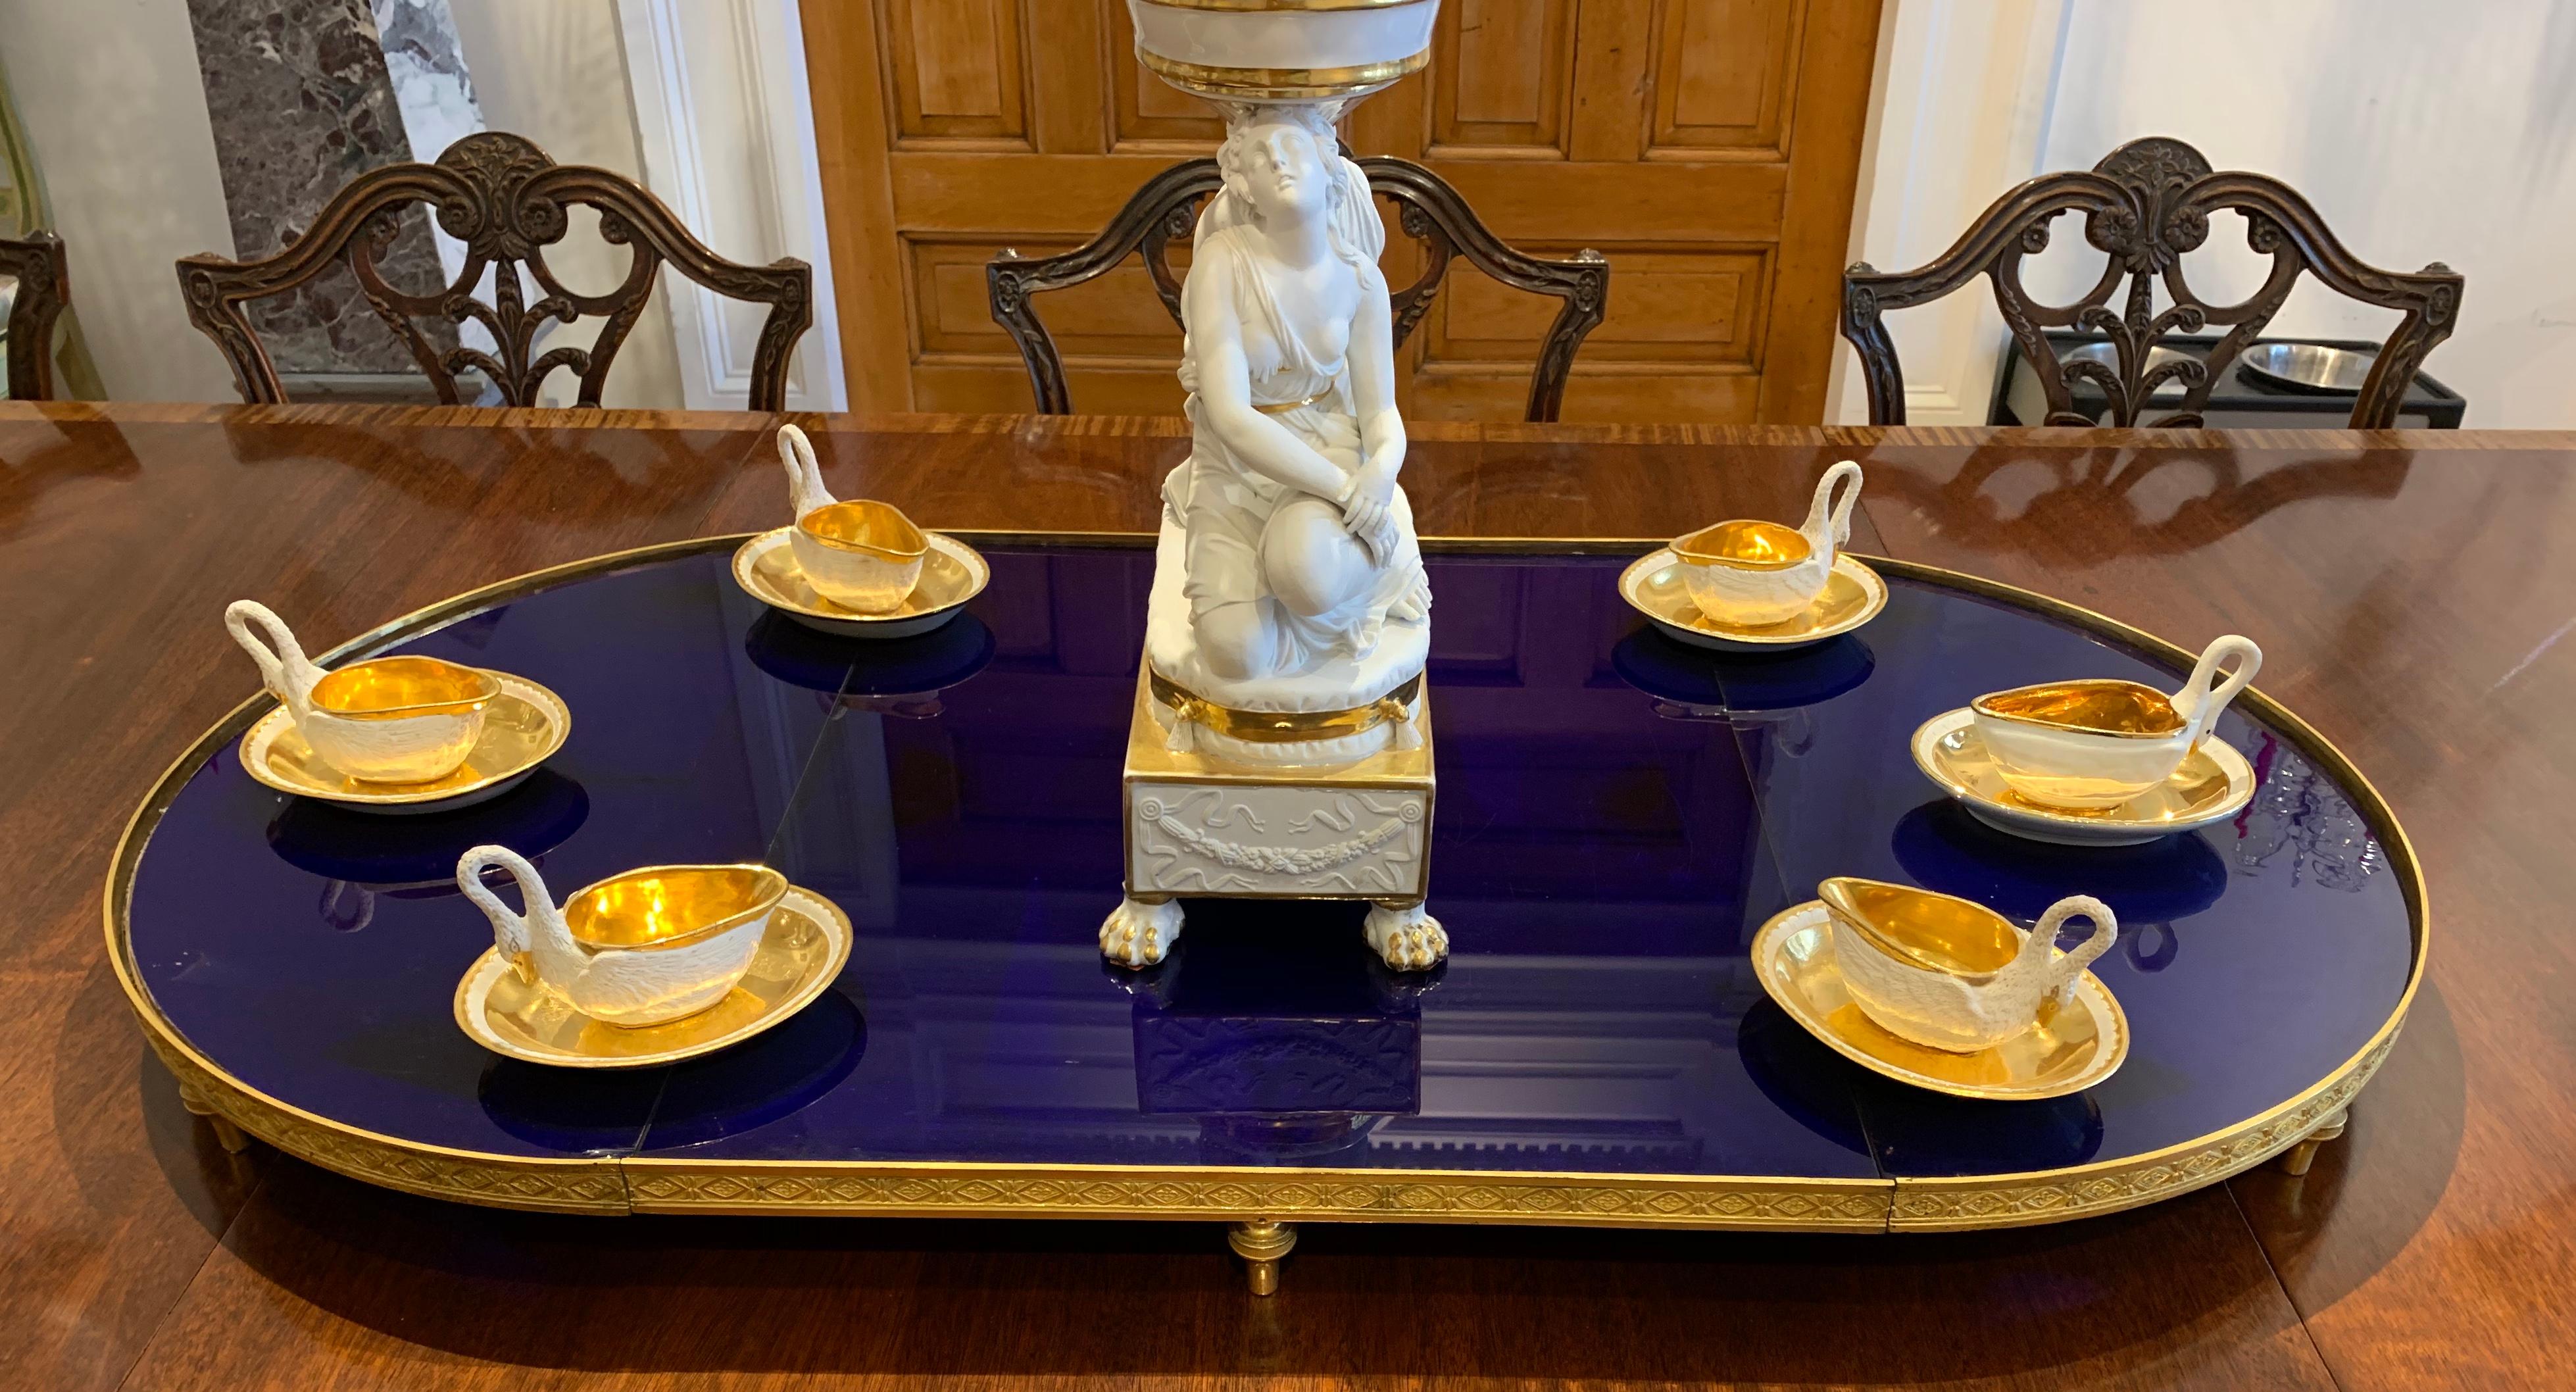 19th century Russian cobalt blue glass and ormolu neoclassical plateau.

Also know as a Surtout de table. In three parts so that it can also create circular form.